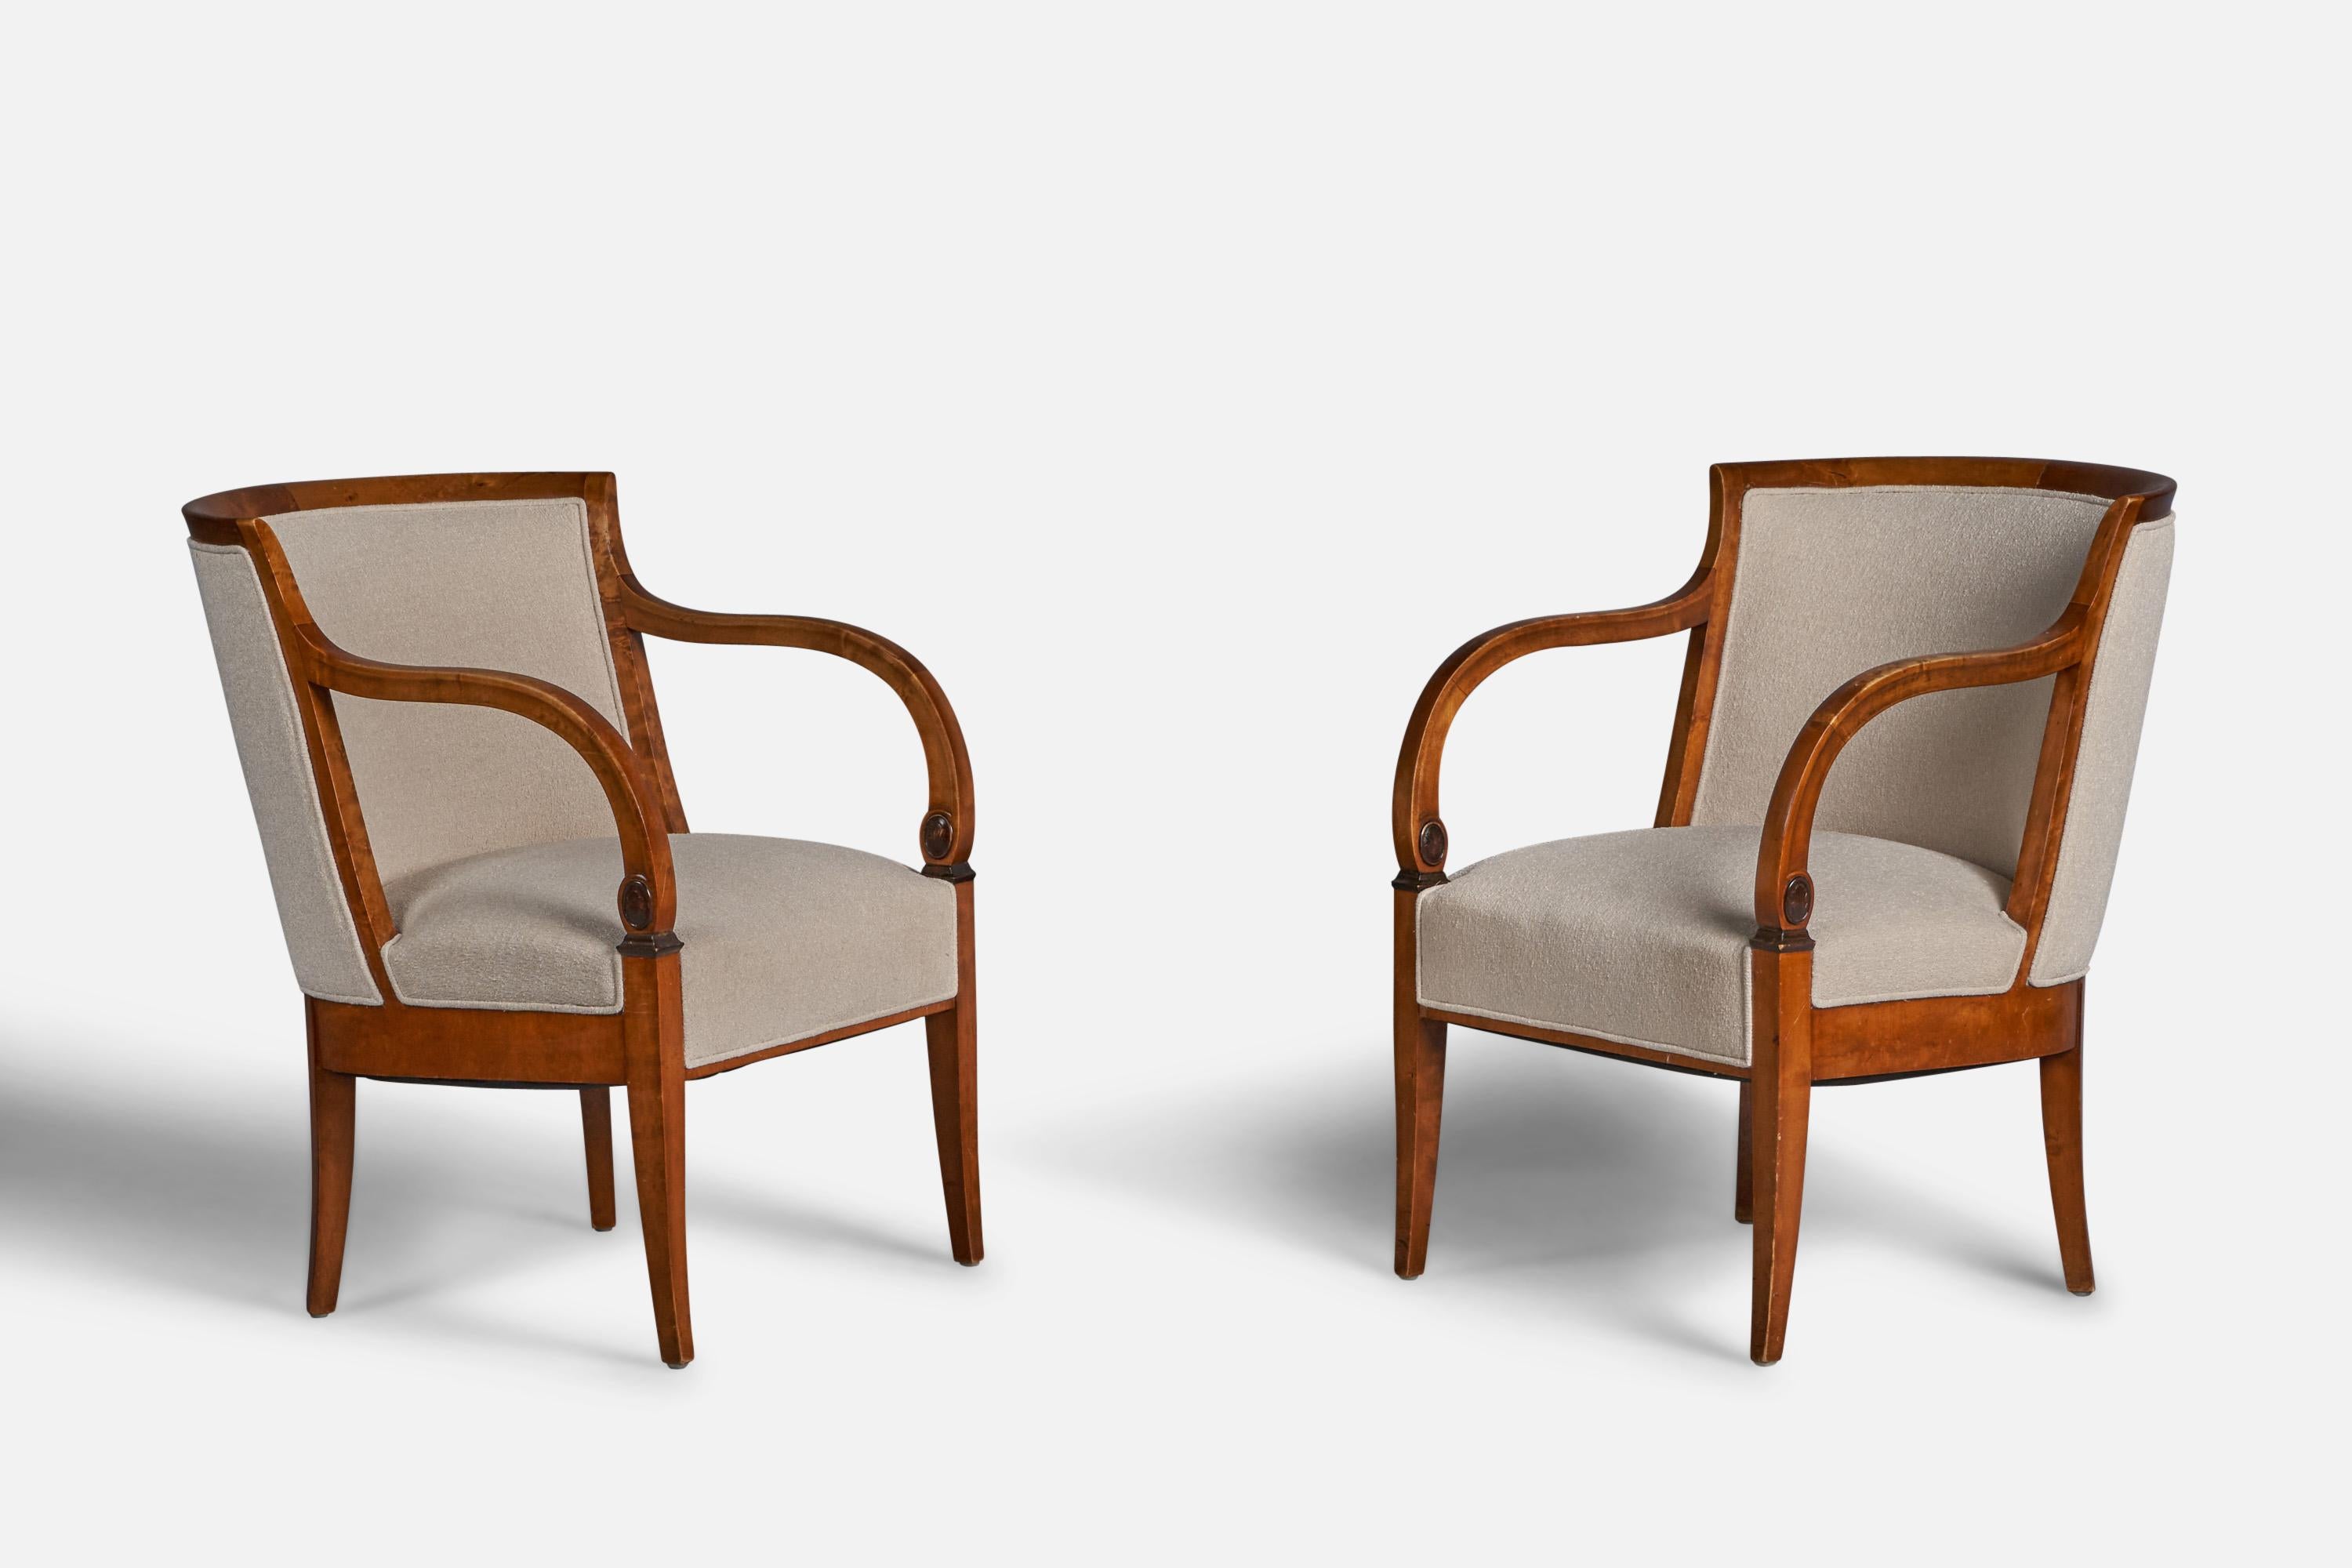 A pair of birch and off-white fabric lounge chairs designed and produced in Sweden, c. 1920s.

18” seat height

